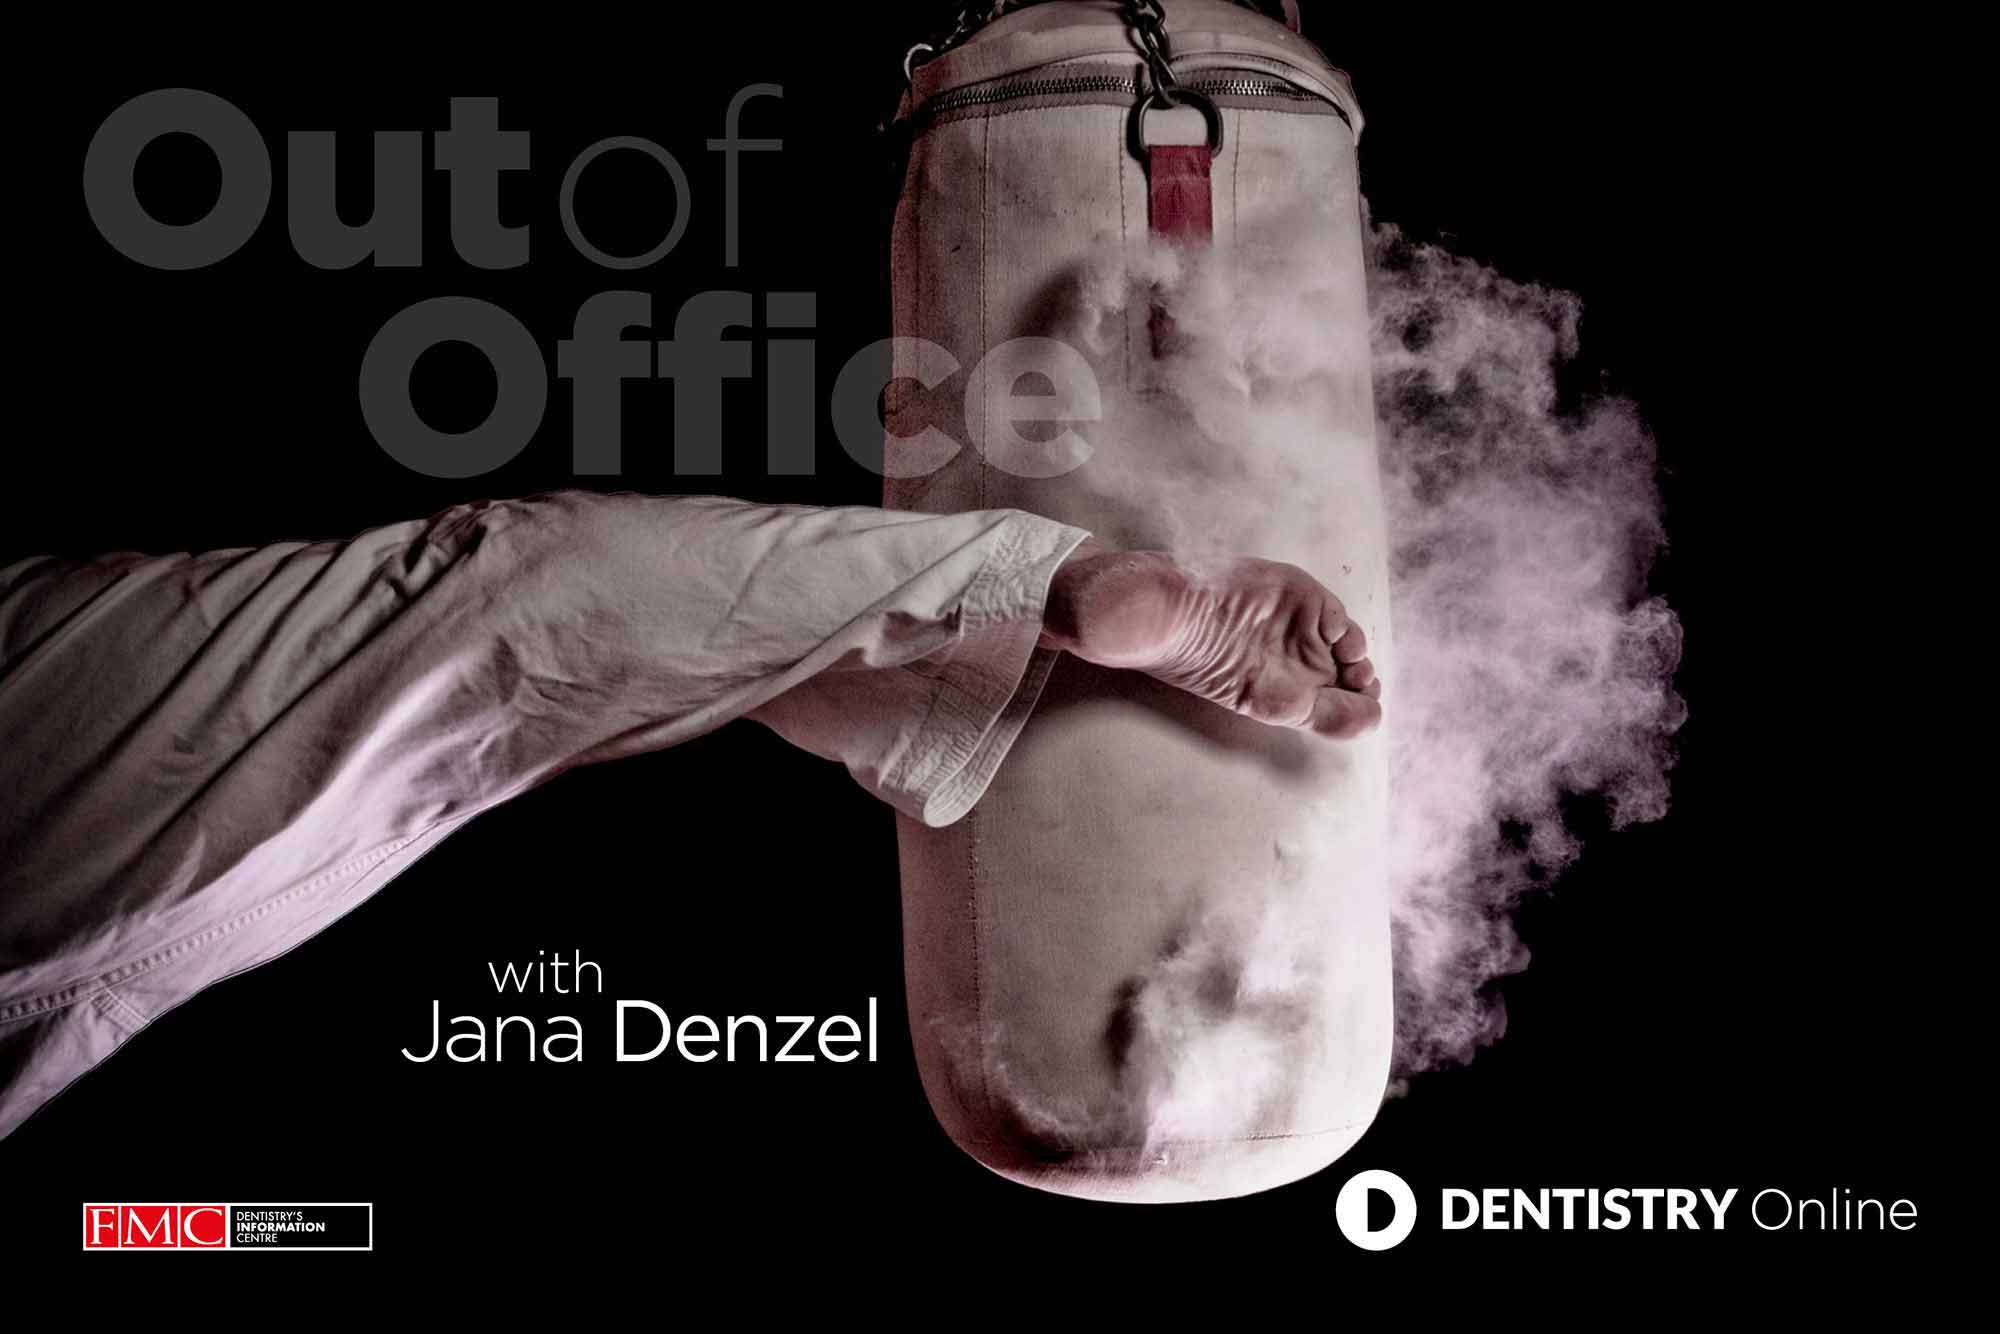 Jana Denzel talks about why martial arts is more than just physical fitness and self-defence